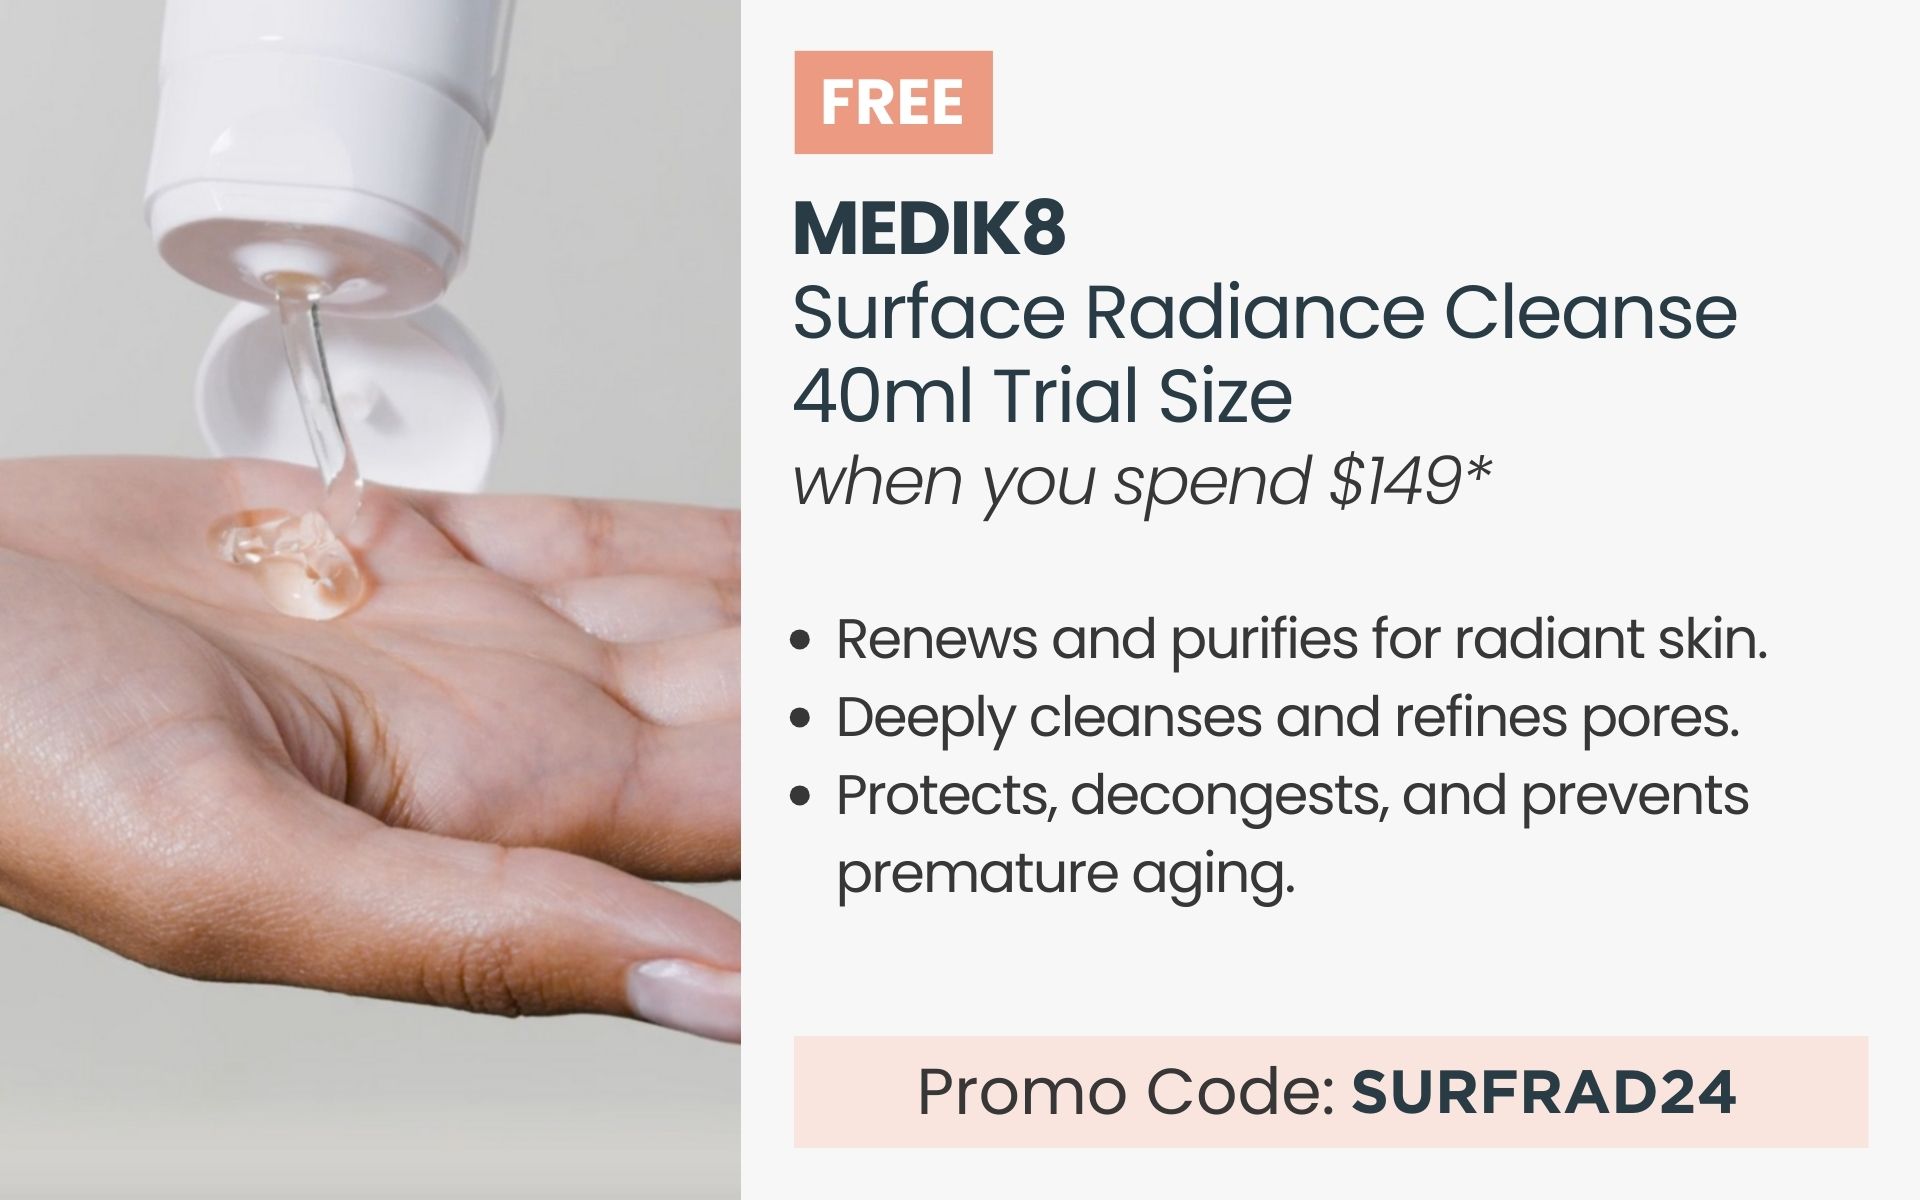 FREE Medik8 Surface Radiance Cleanse 40ml Trial Size. Min spend $149. Promo Code SURFRAD24